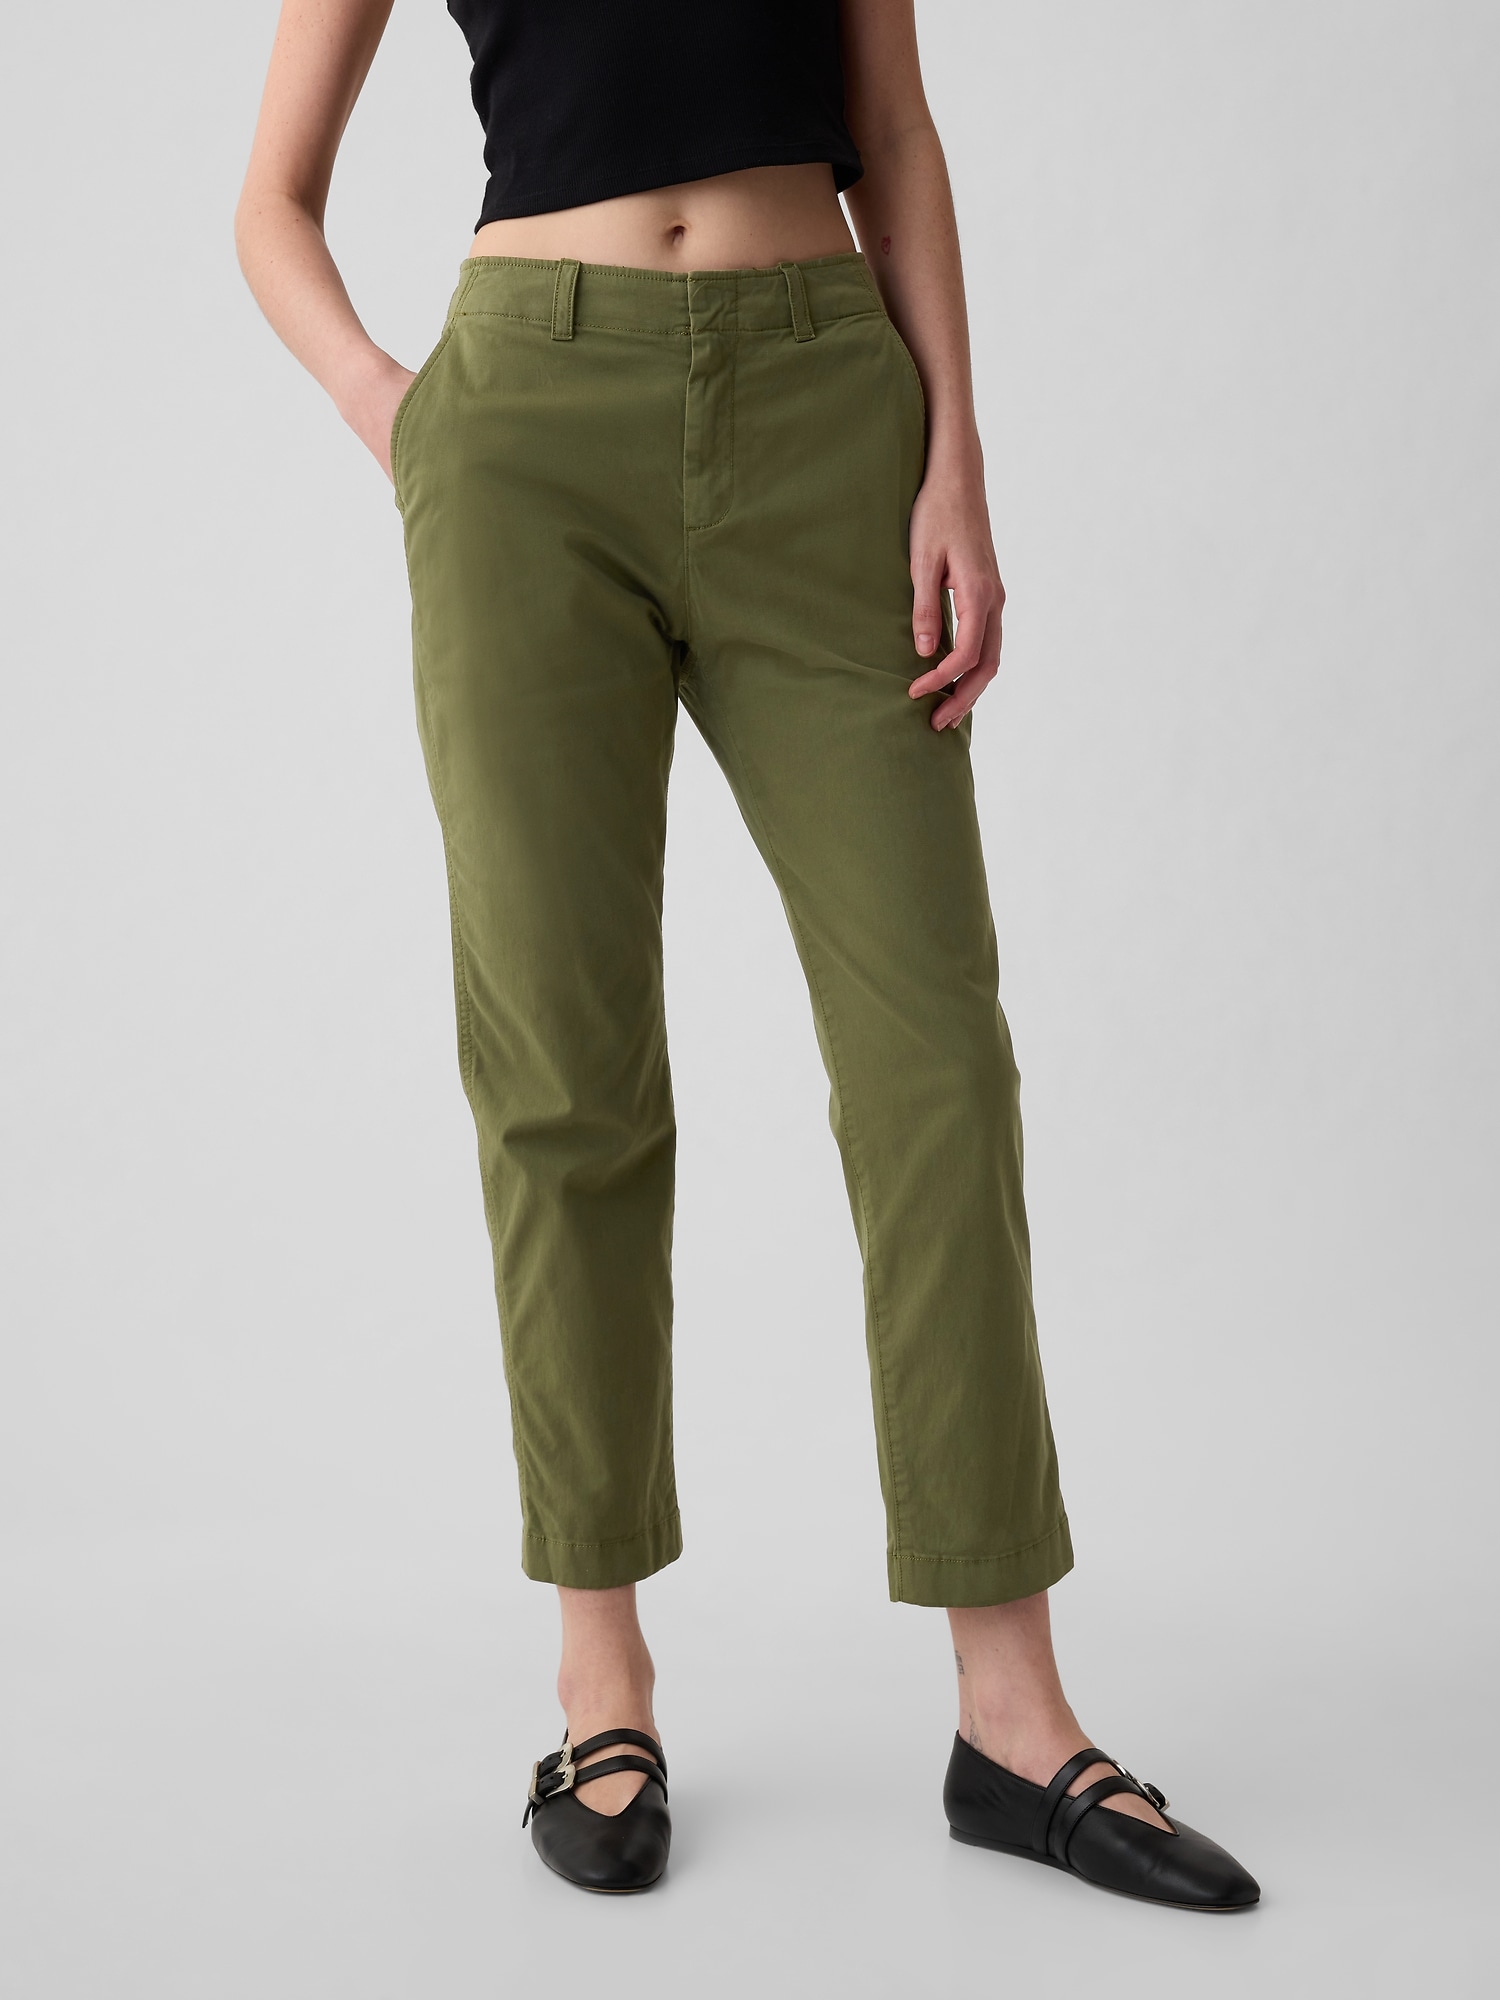 Time Tru Pants 0 2 XS Olive Green Solid Mid Rise Pull On Cuffed Crop Loose  Army